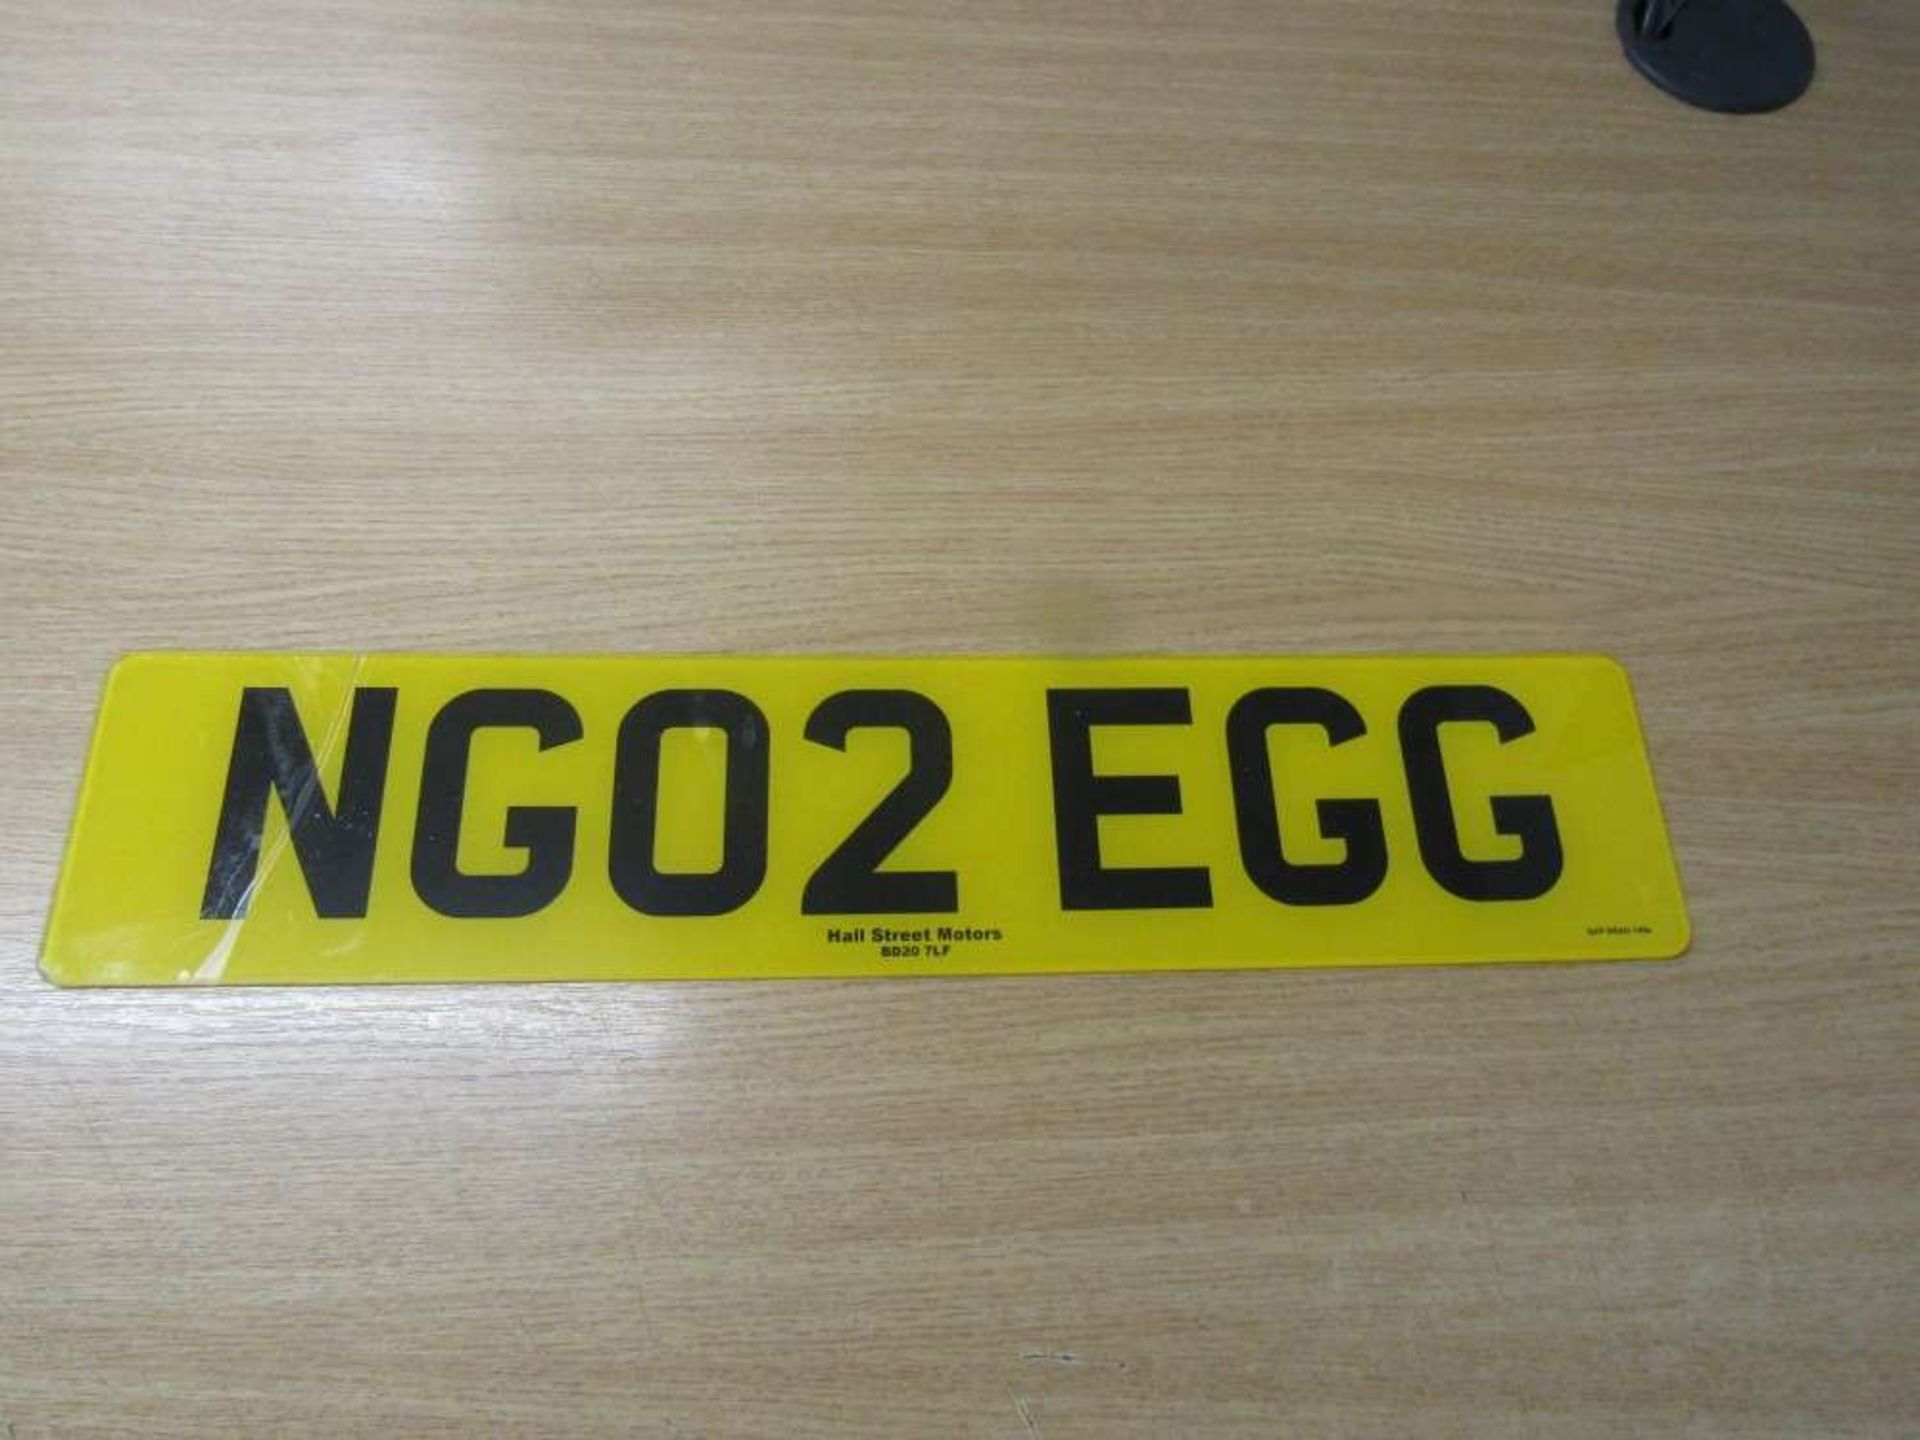 NG02 EGG, Private Registration Number c/w Retention Document